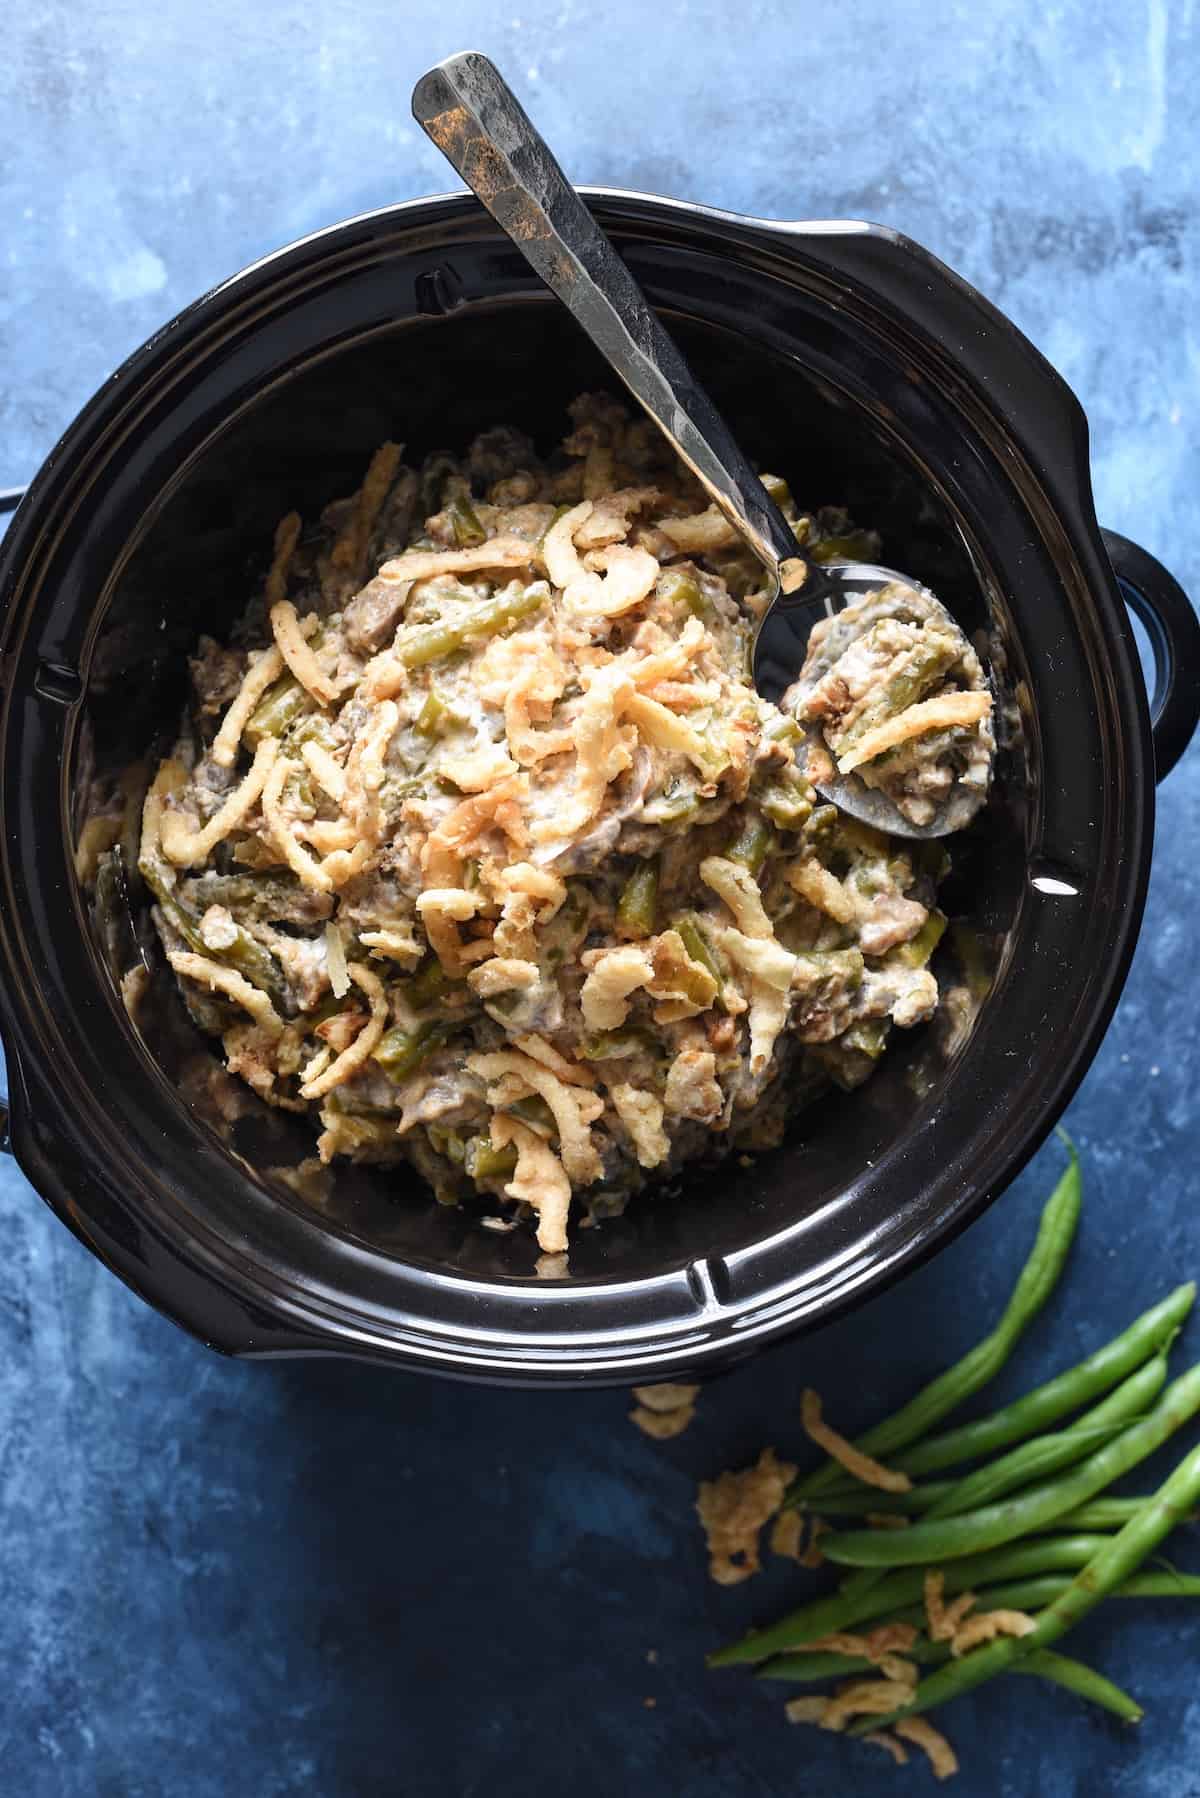 This Crockpot Green Bean Casserole is made with fresh beans and doesn't use canned soup. It's a yummy and easy upgrade to a classic dish, and doesn't take up oven space for a holiday meal! | foxeslovelemons.com